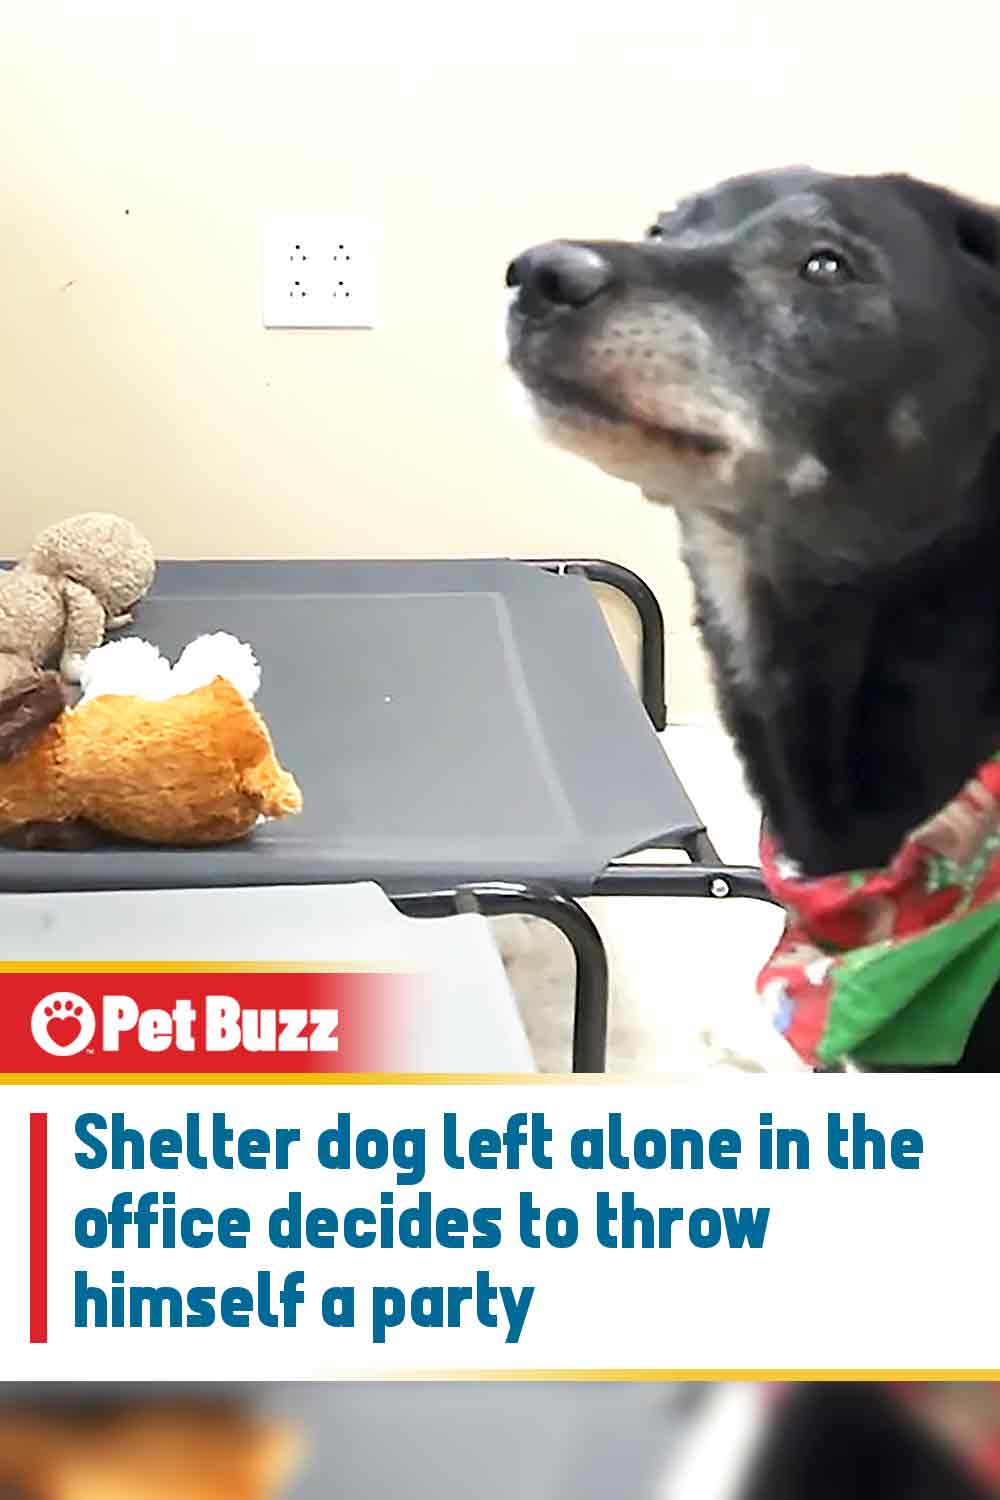 Shelter dog left alone in the office decides to throw himself a party